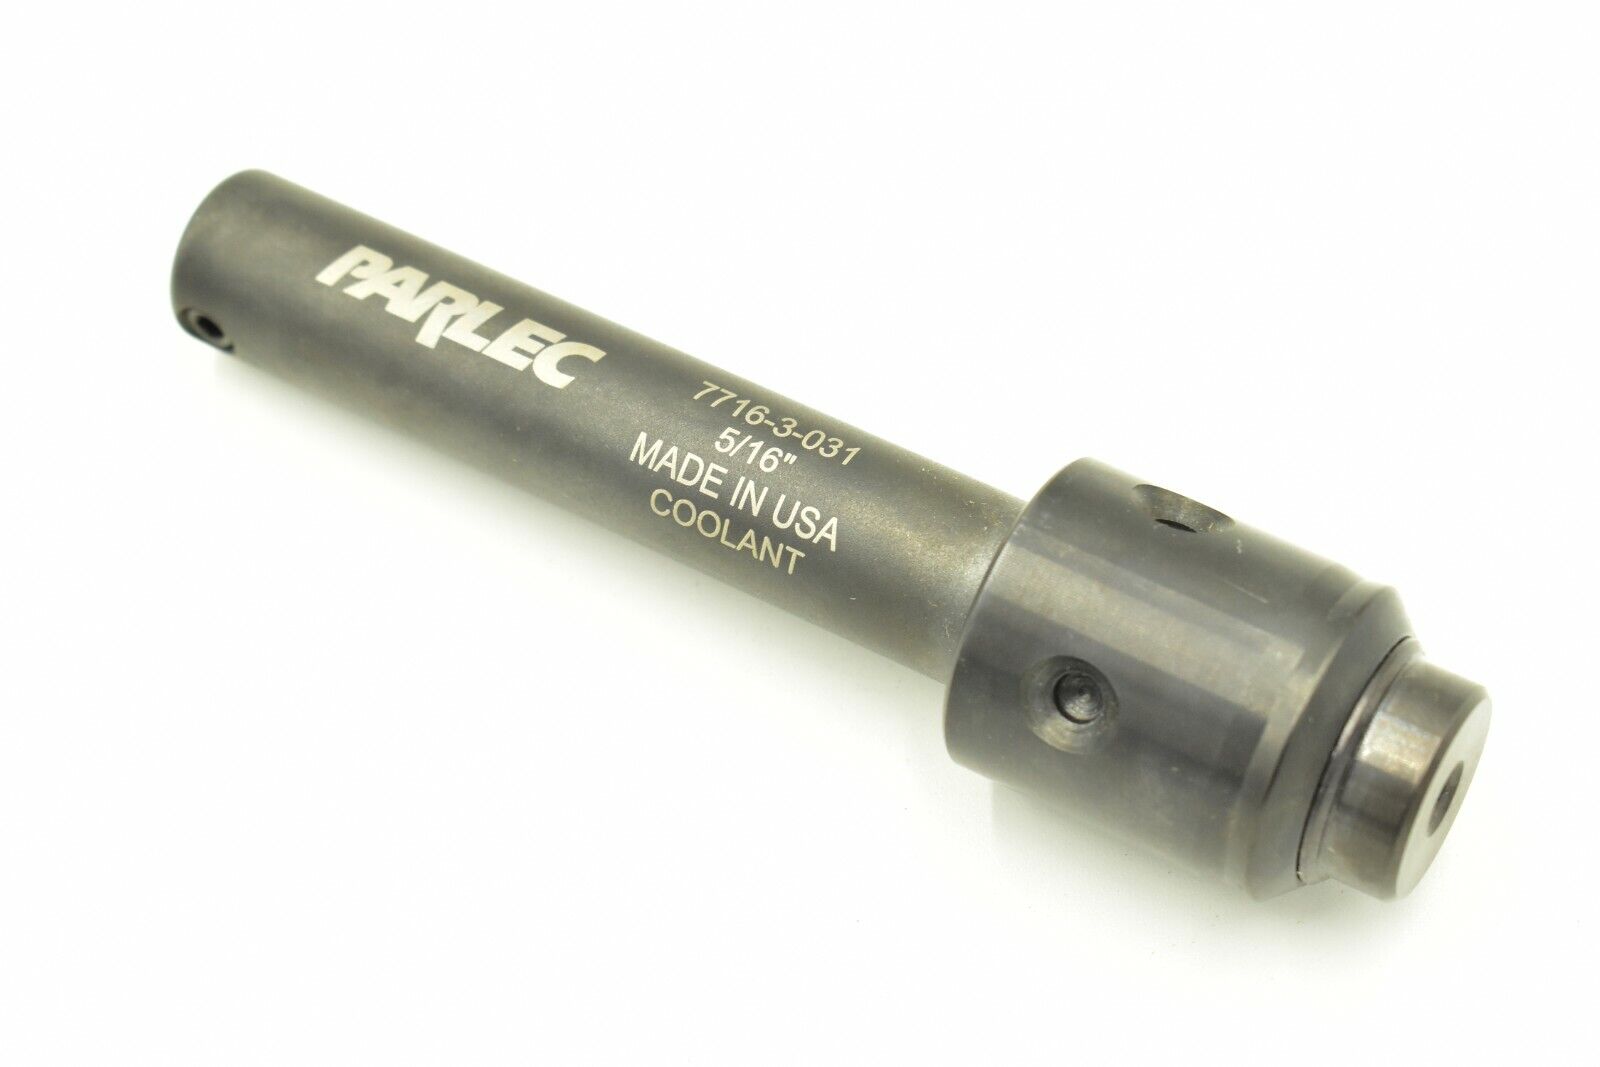 Parlec 7716-3-031 Numertap 770 3" Extended Coolant Through Tap Adapter 5/16"